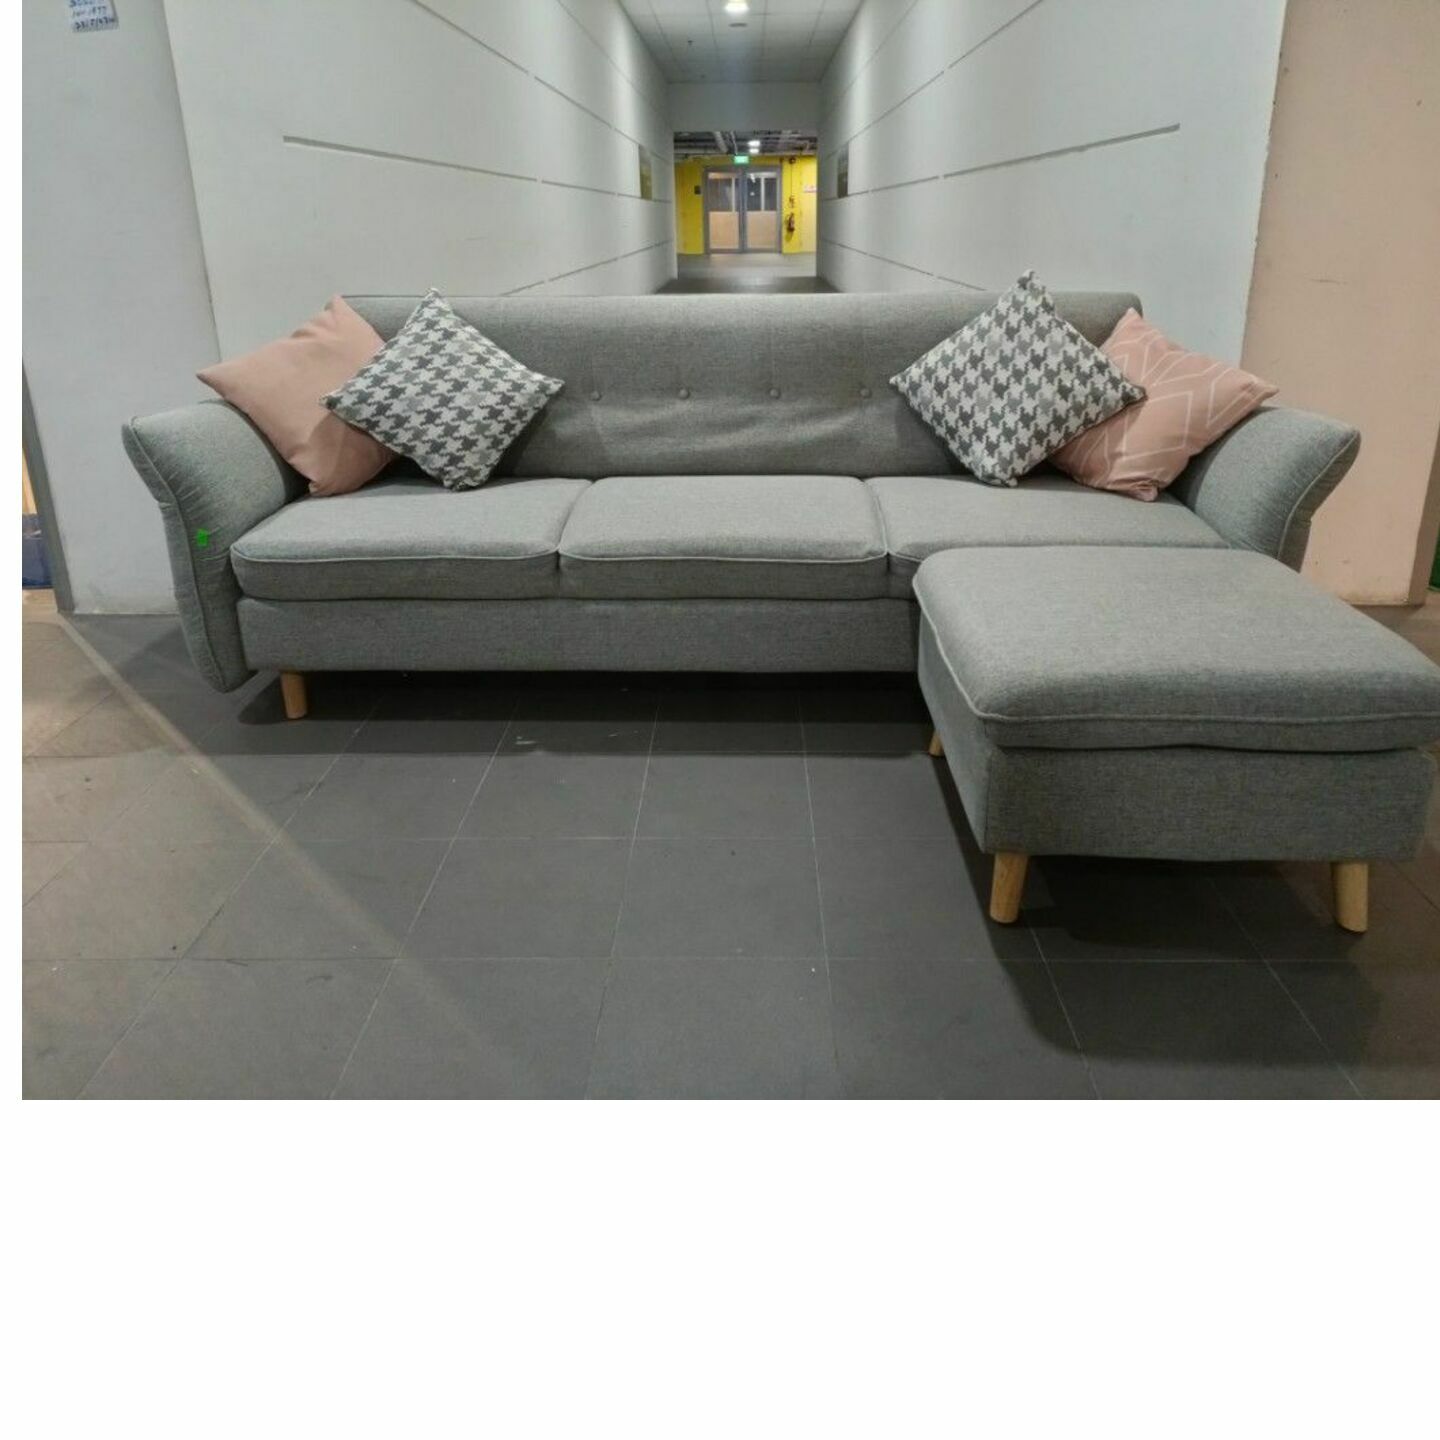 HAYESOD 3 Seater Sofa with Ottoman in GREY FABRIC